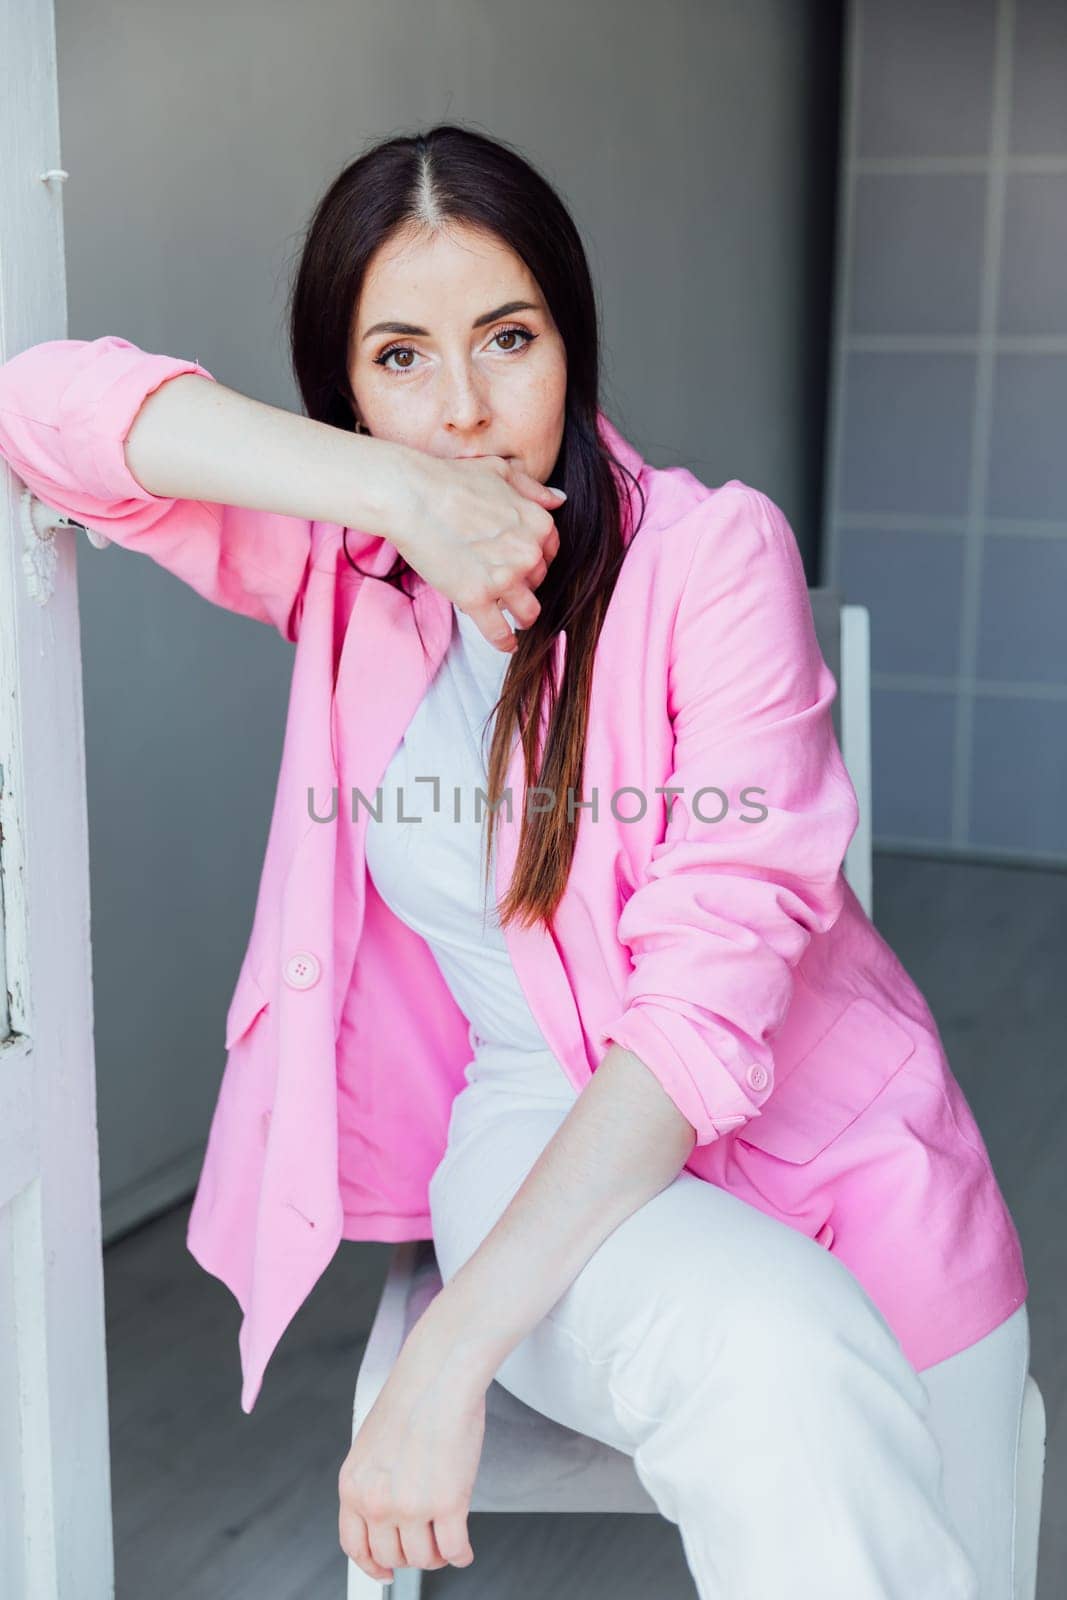 brunette woman in white suit and pink jacket